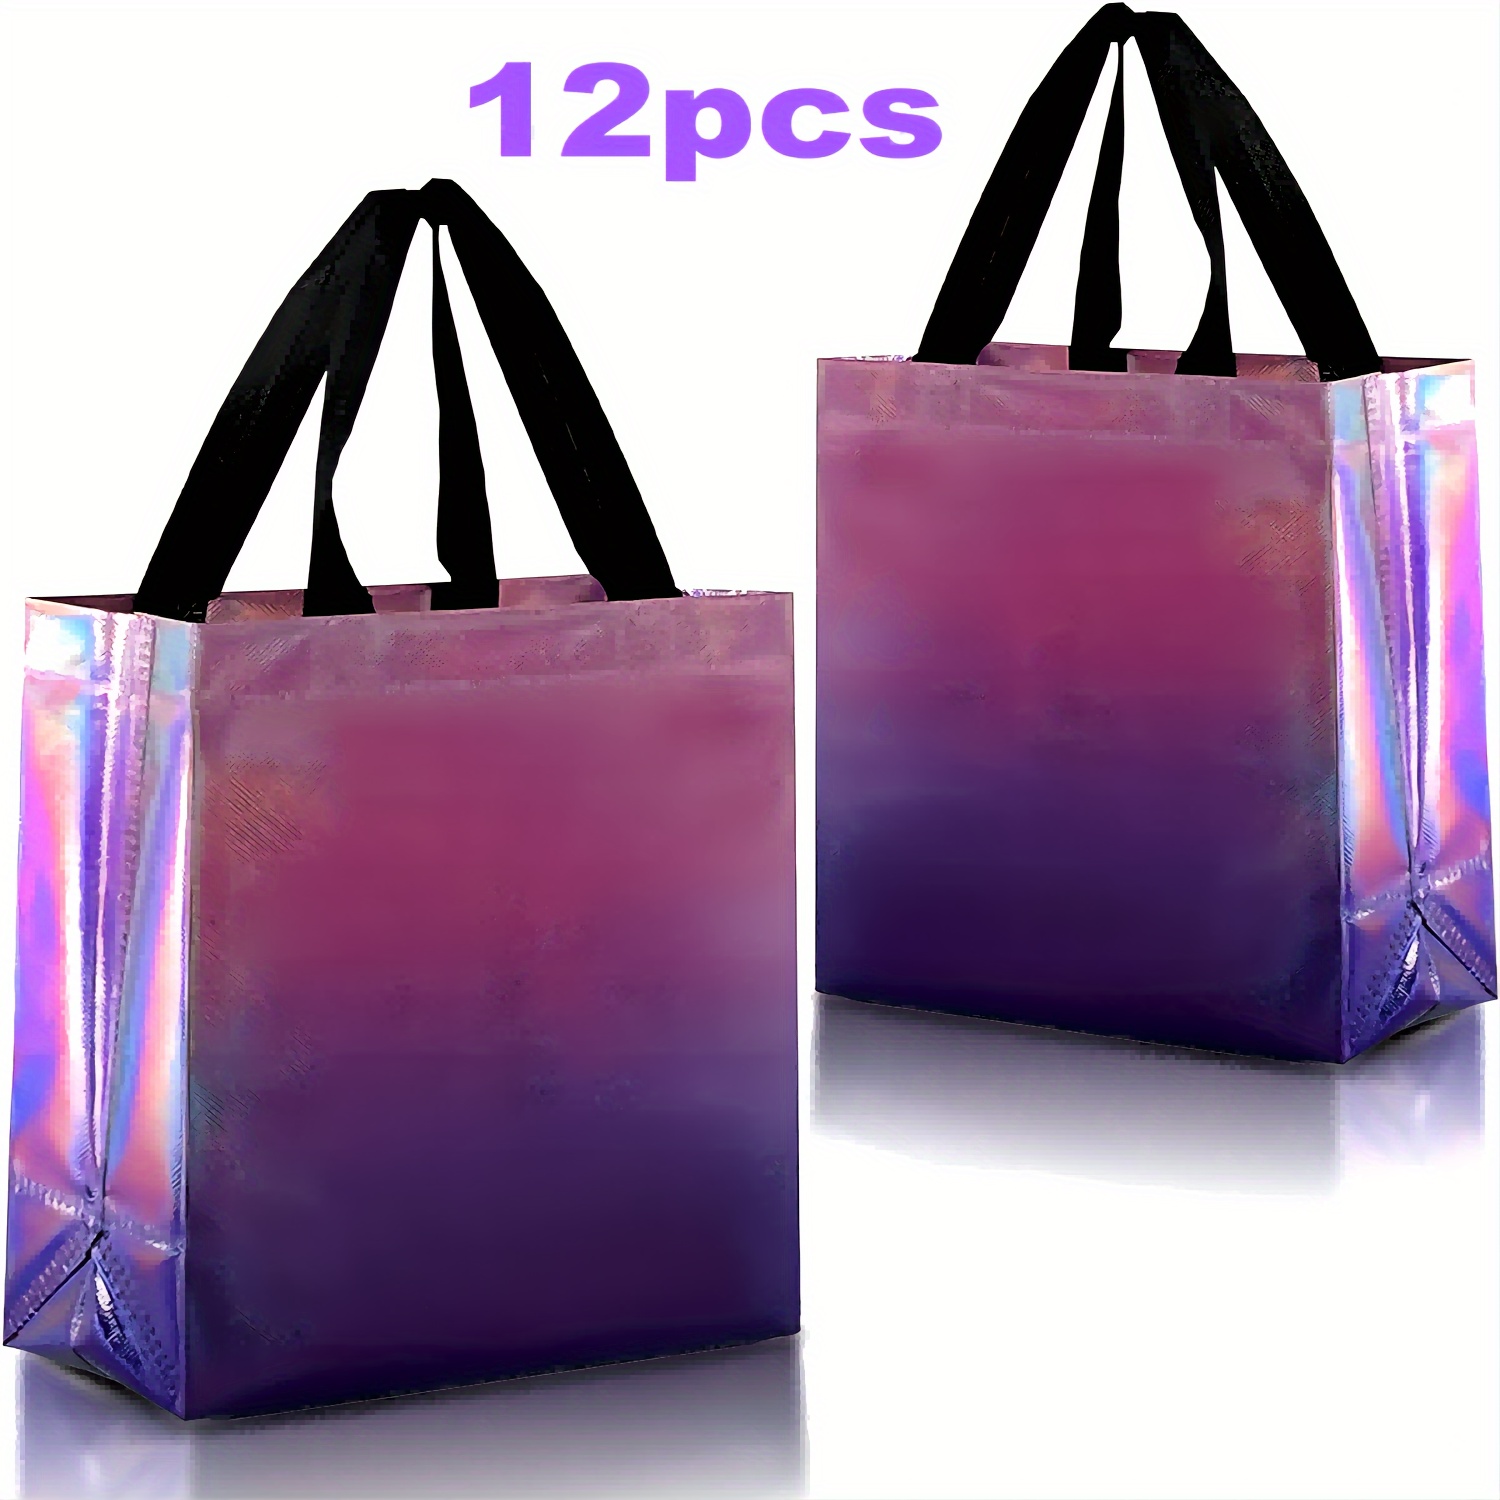 

12pcs Rise Gradient Gift Bags, Purple Reusable Gift Bags Medium Size With Iridescent Finish, Colorful Party Favor Bags With Handles Birthday Bags, Goodie Bags, 8x4x10in For Shops